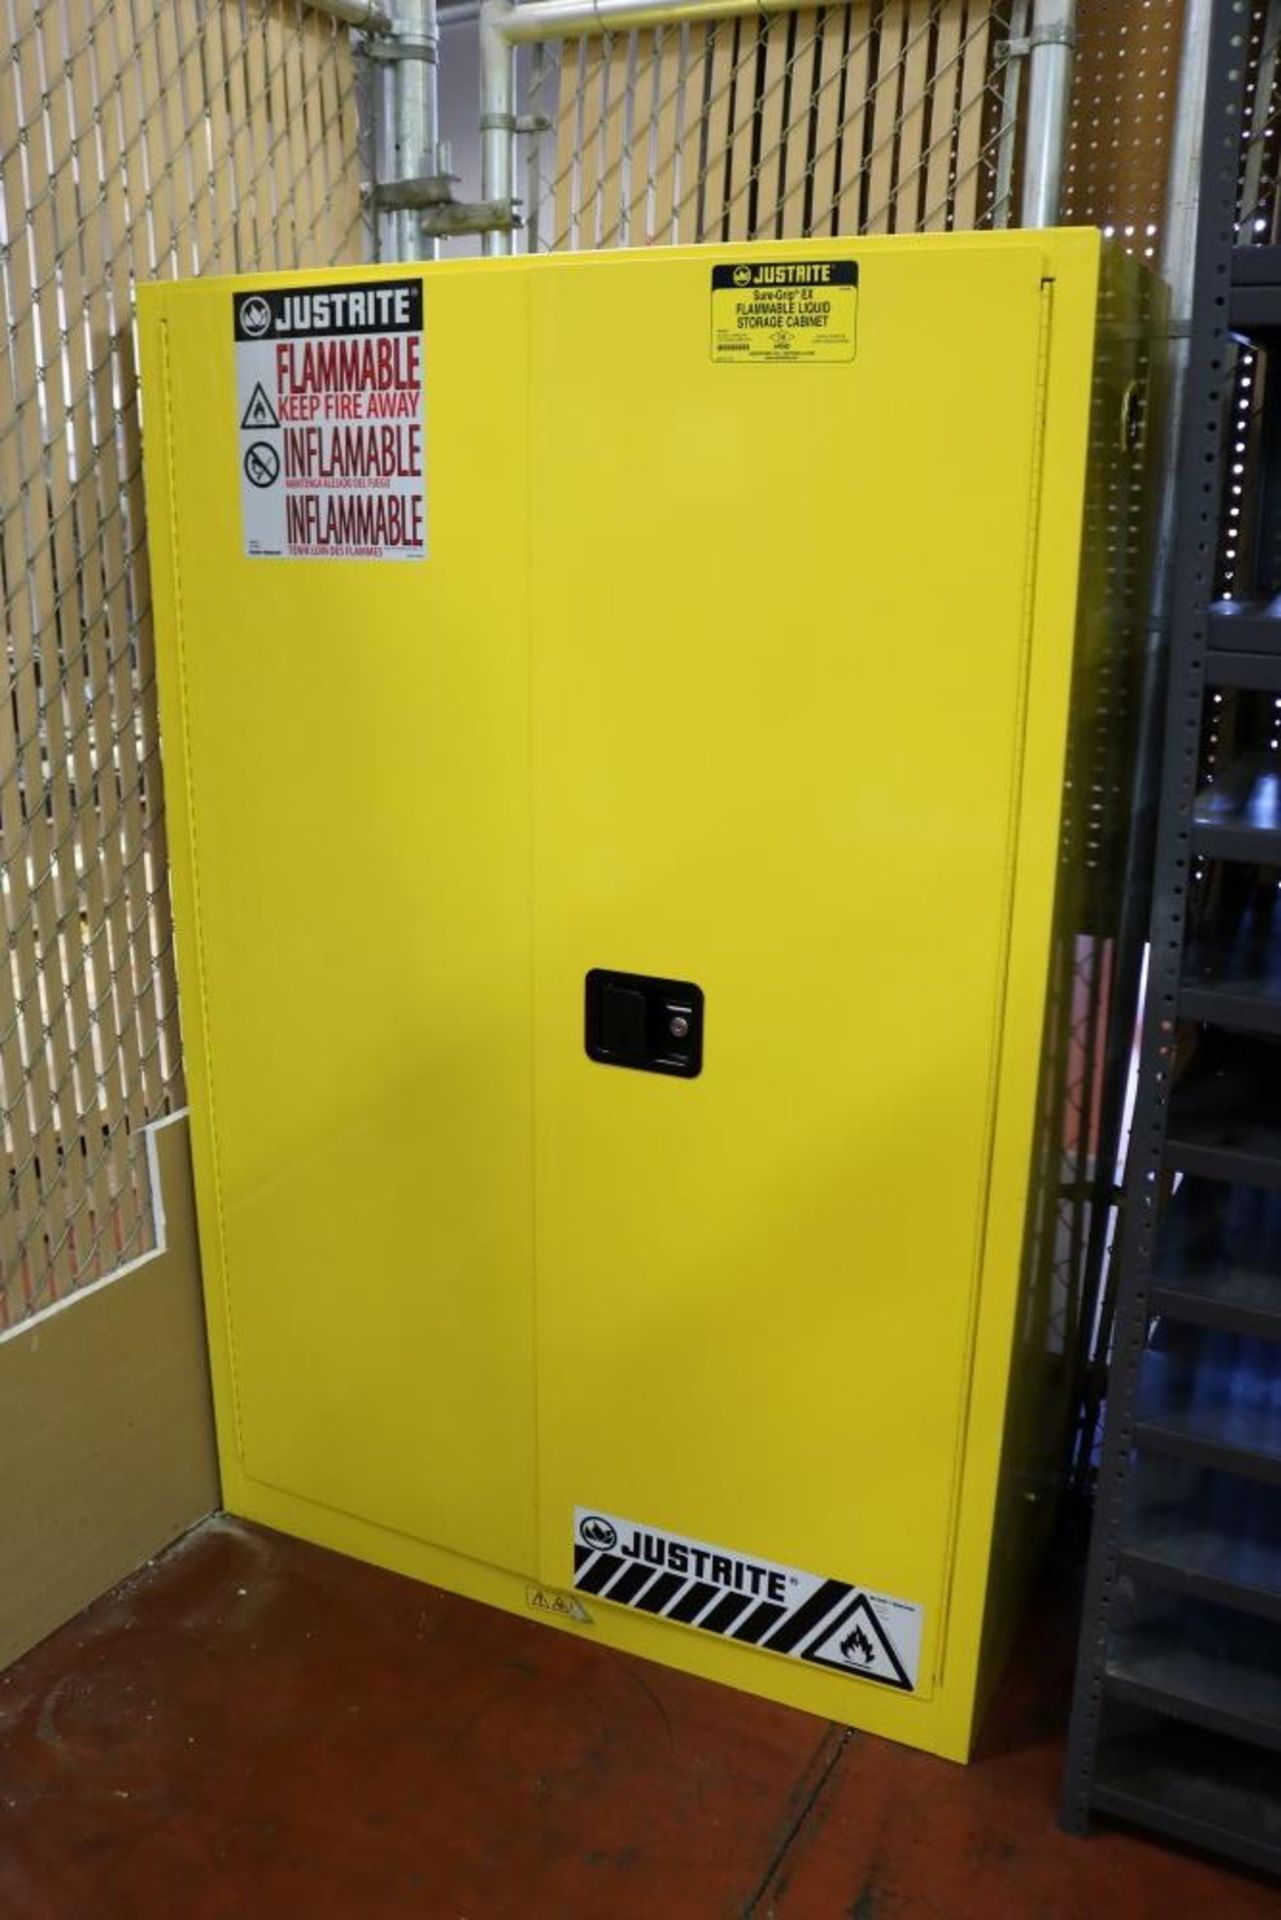 Like New - Justrite Flammable Storage Cabinet 45 gallon capacity